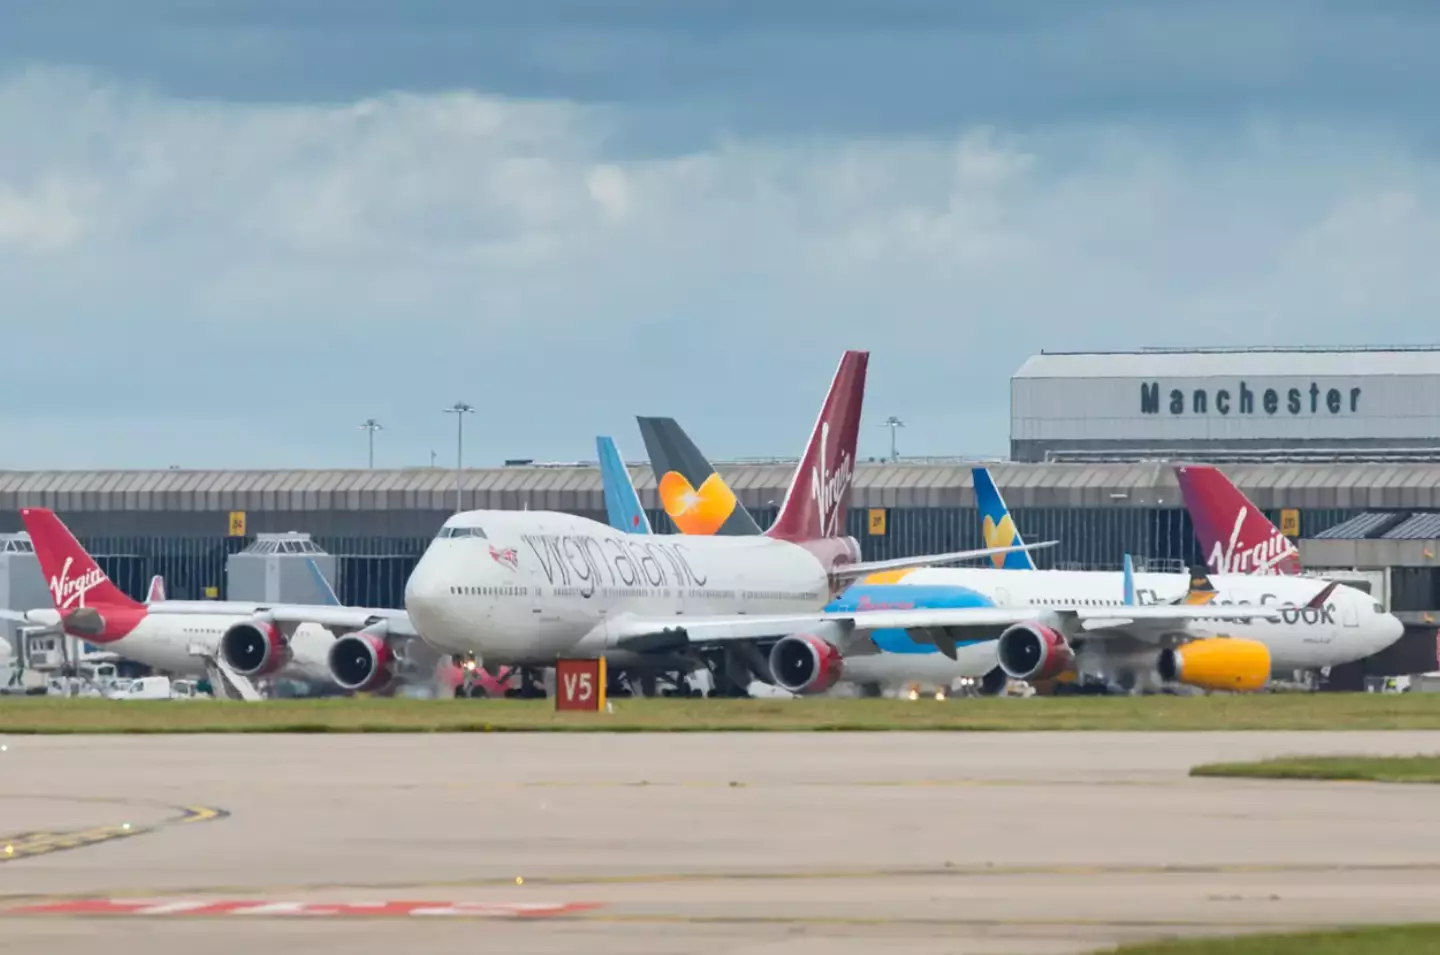 A major UK airport was forced to close its runways.